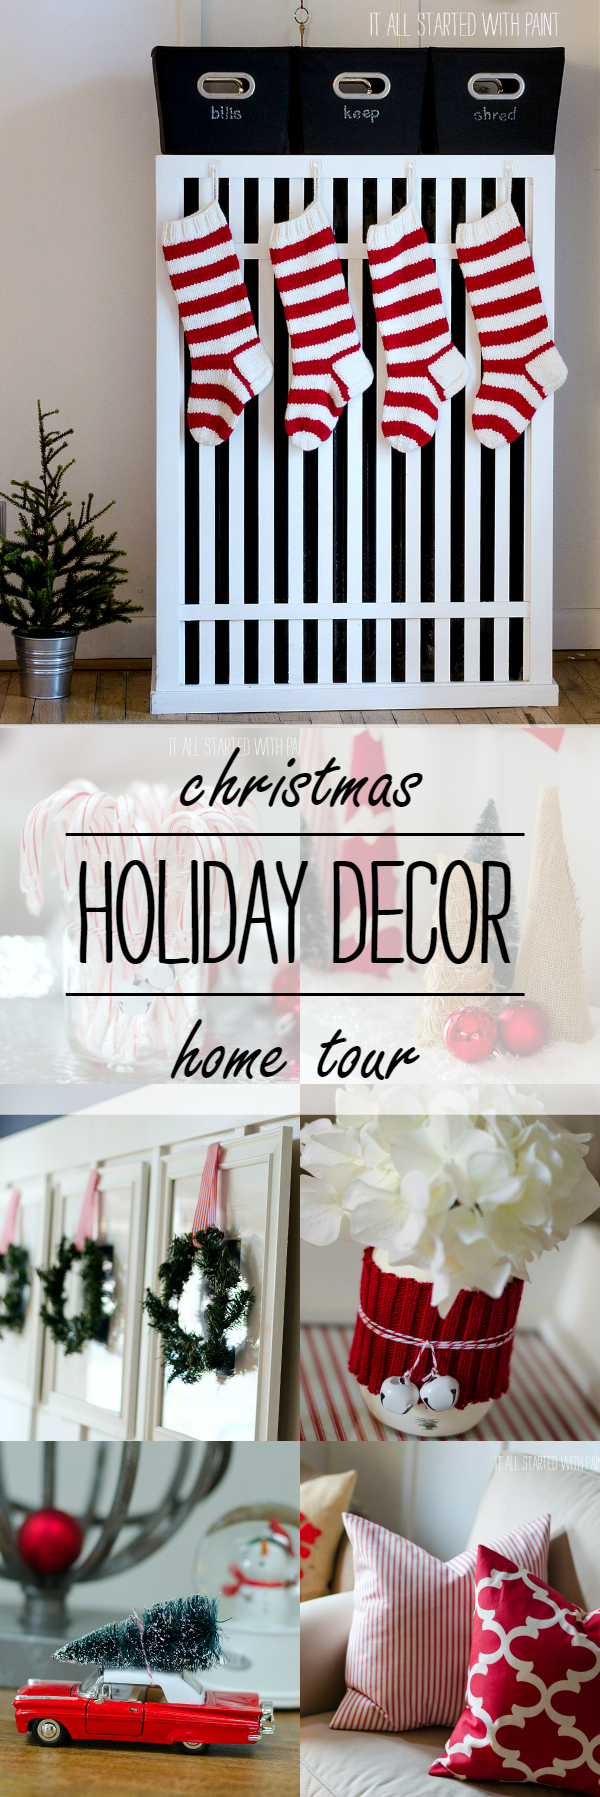 Christmas Decorating Ideas Using Red and White